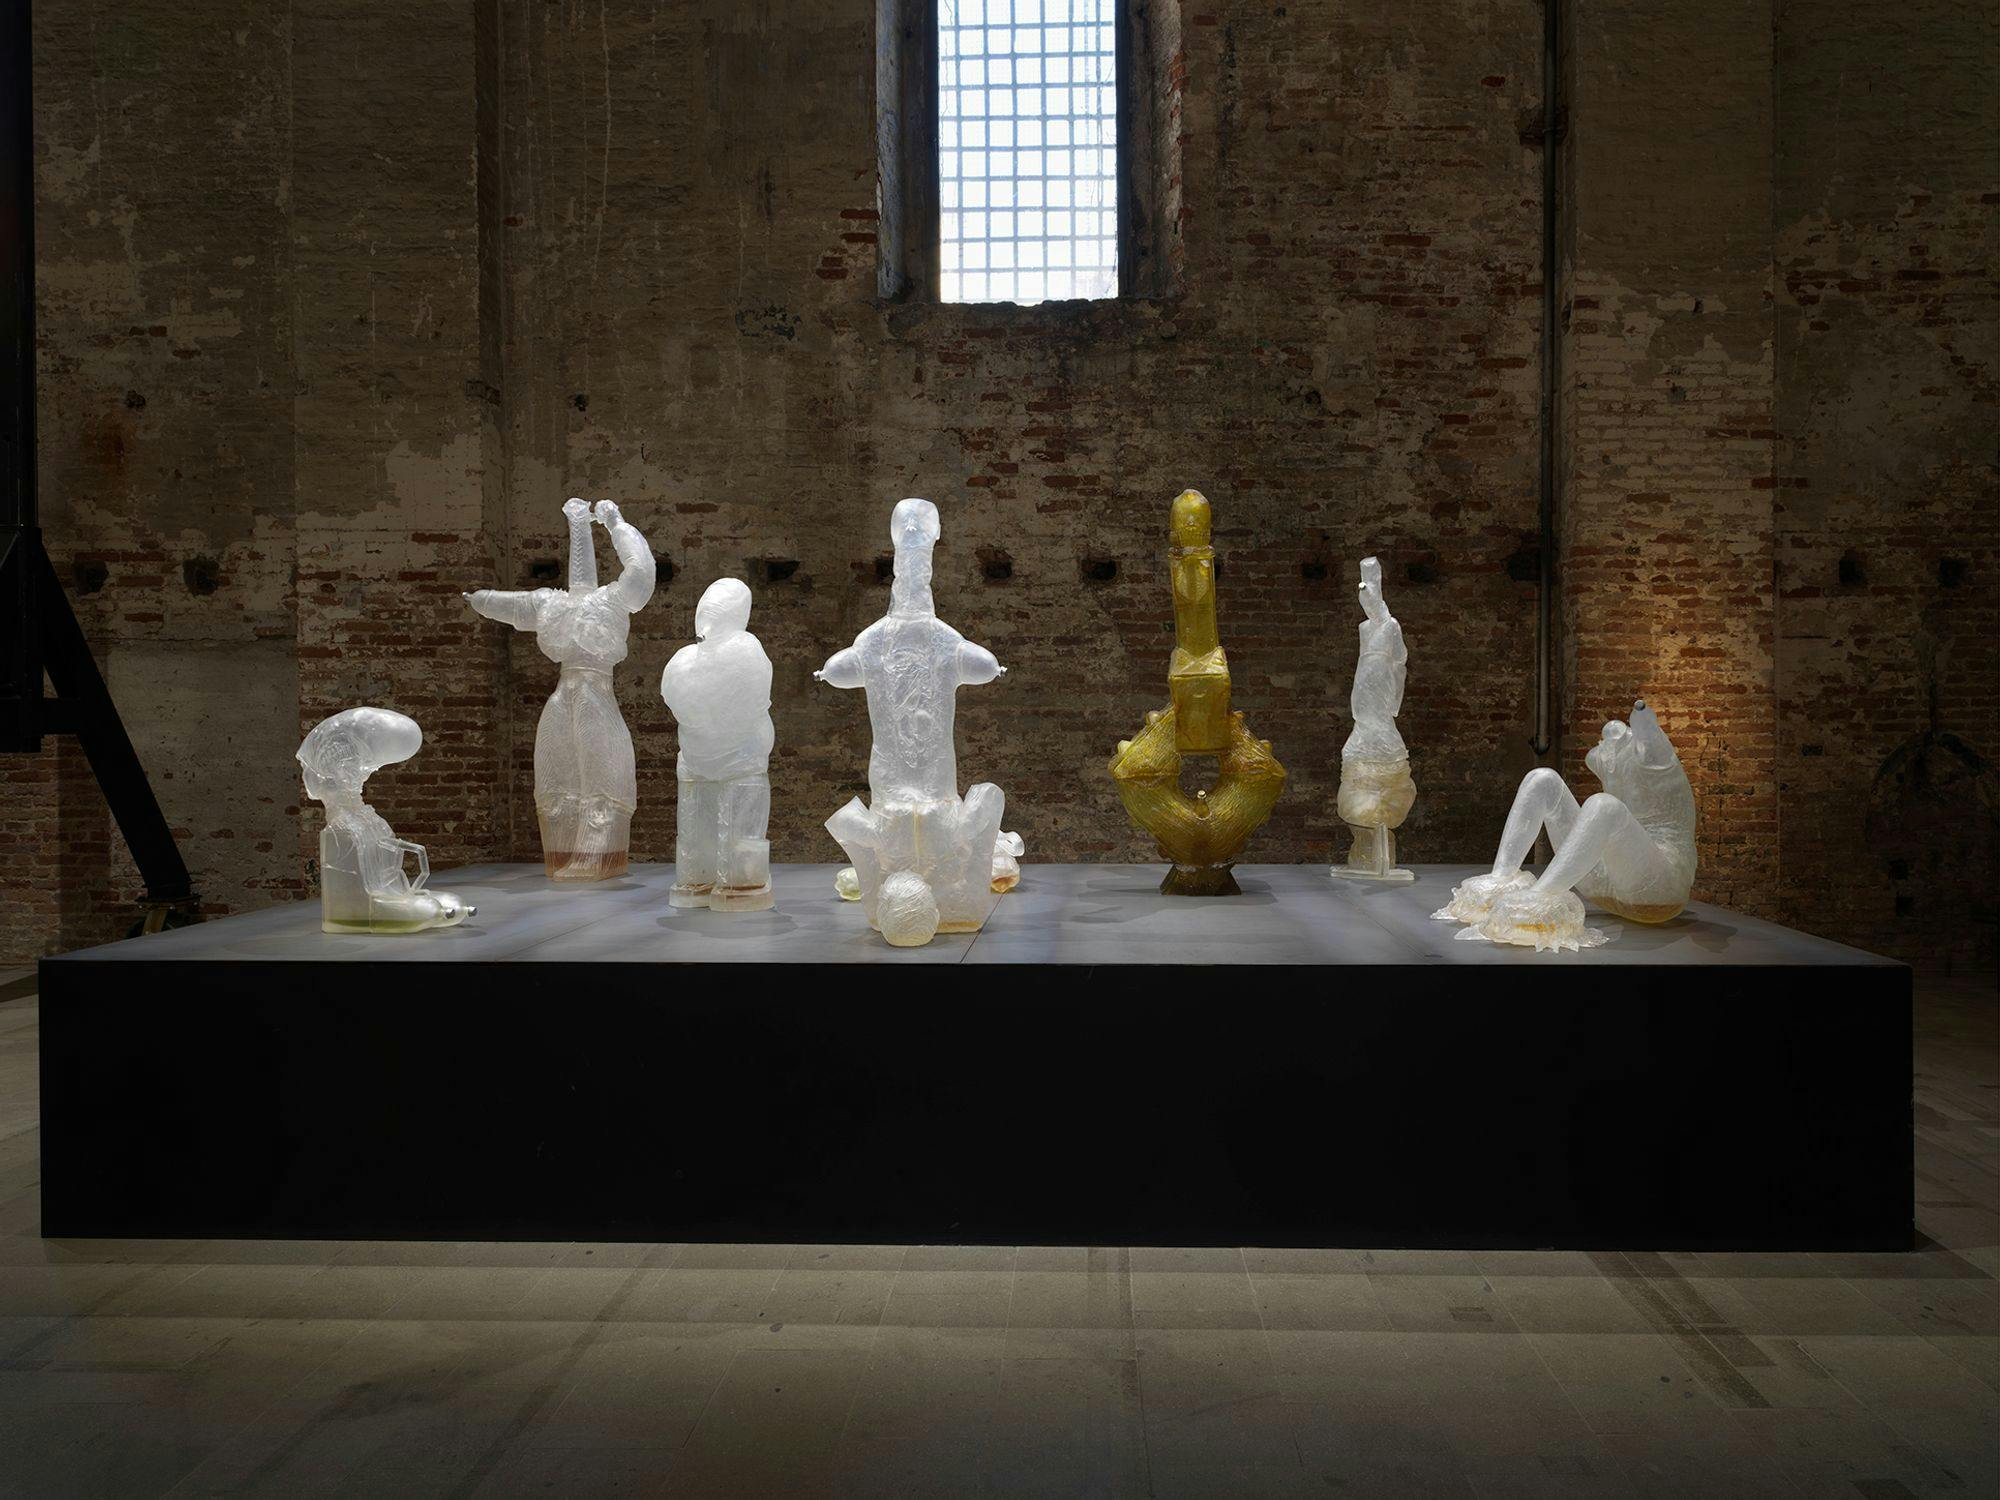 An installation view of sculptures by Andra Ursuța on view in the 58th Venice Biennale’s group exhibition